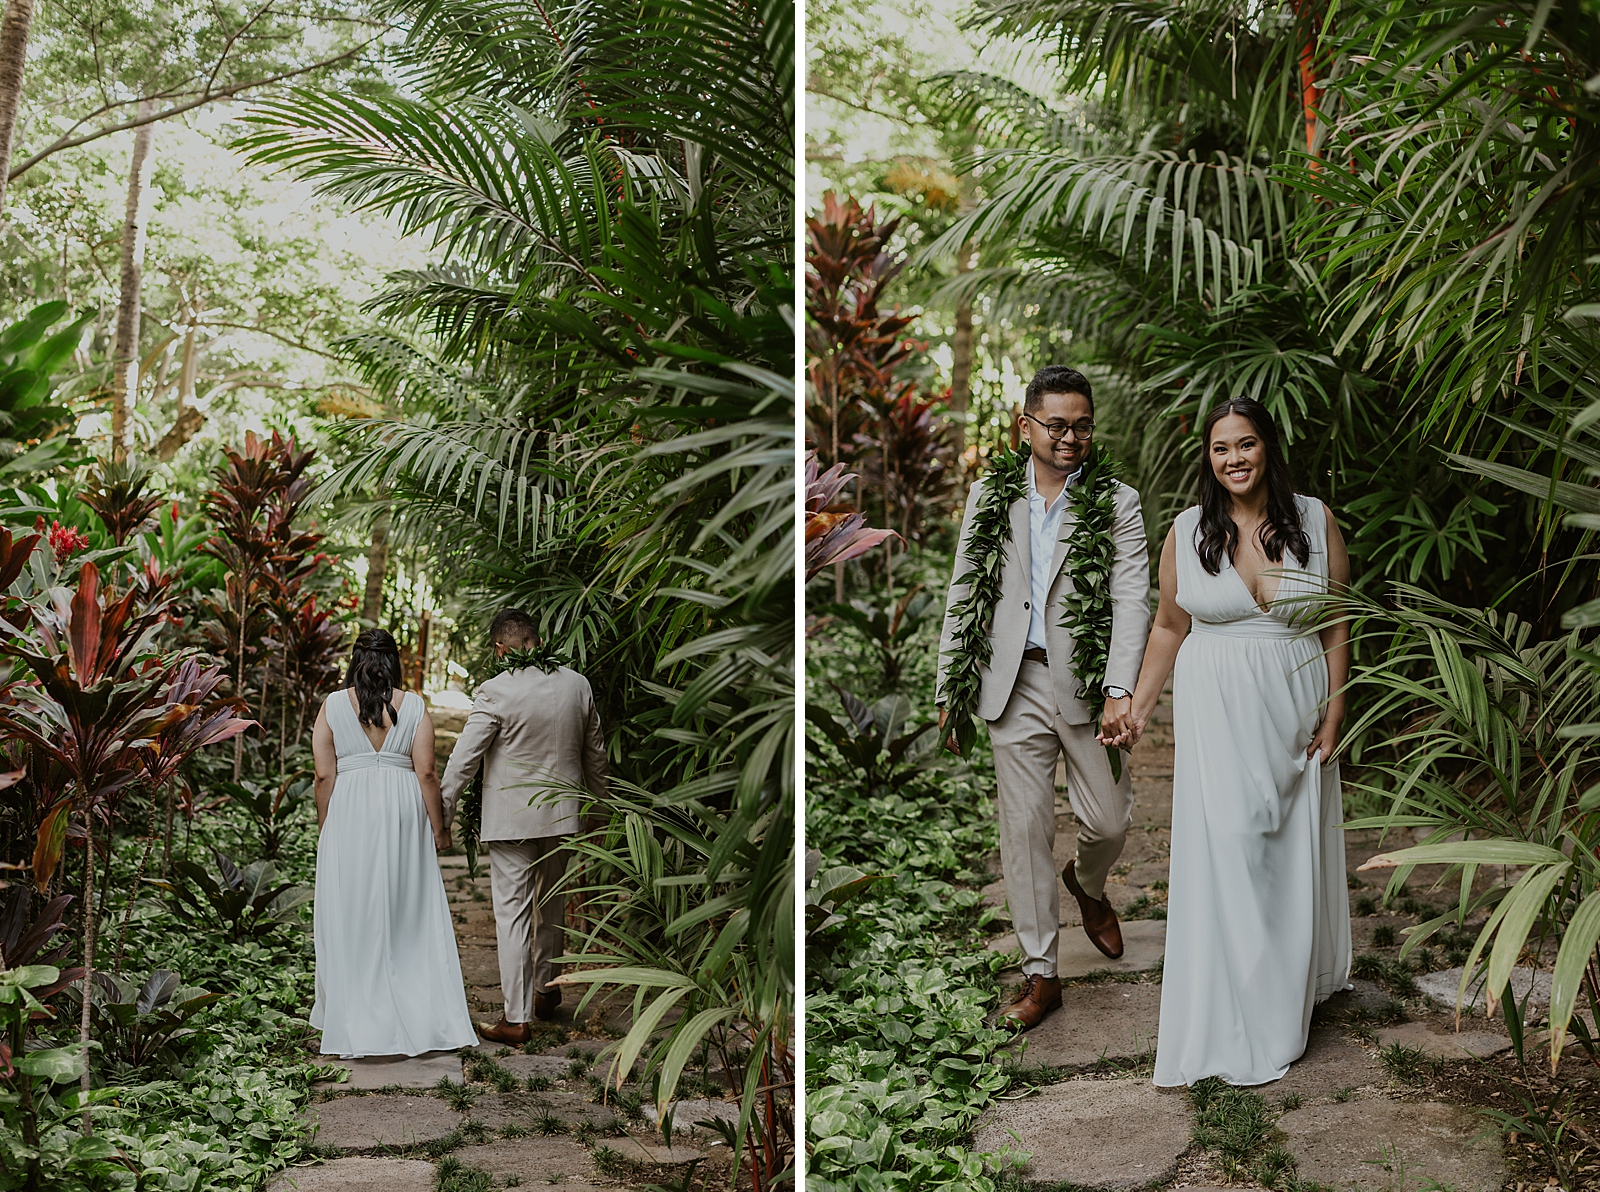 Bride and Groom holding hands and walking on cobblestones with tropical greenery around them